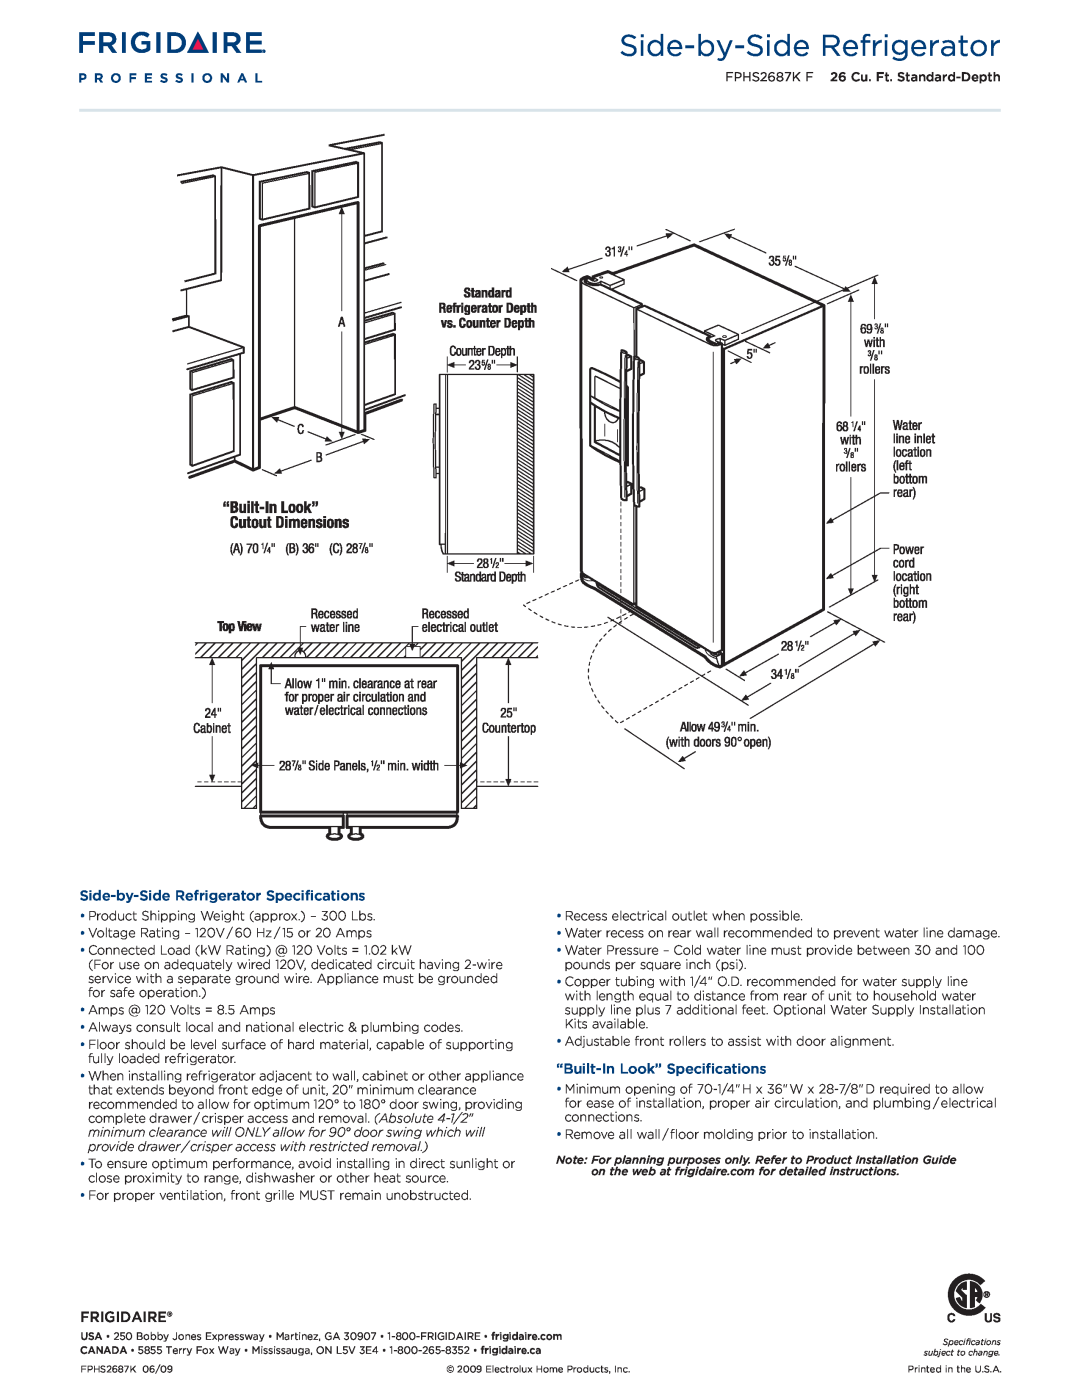 Frigidaire FPHS2687KF dimensions Side-by-SideRefrigerator Specifications, “Built-InLook” Specifications, Frigidaire 